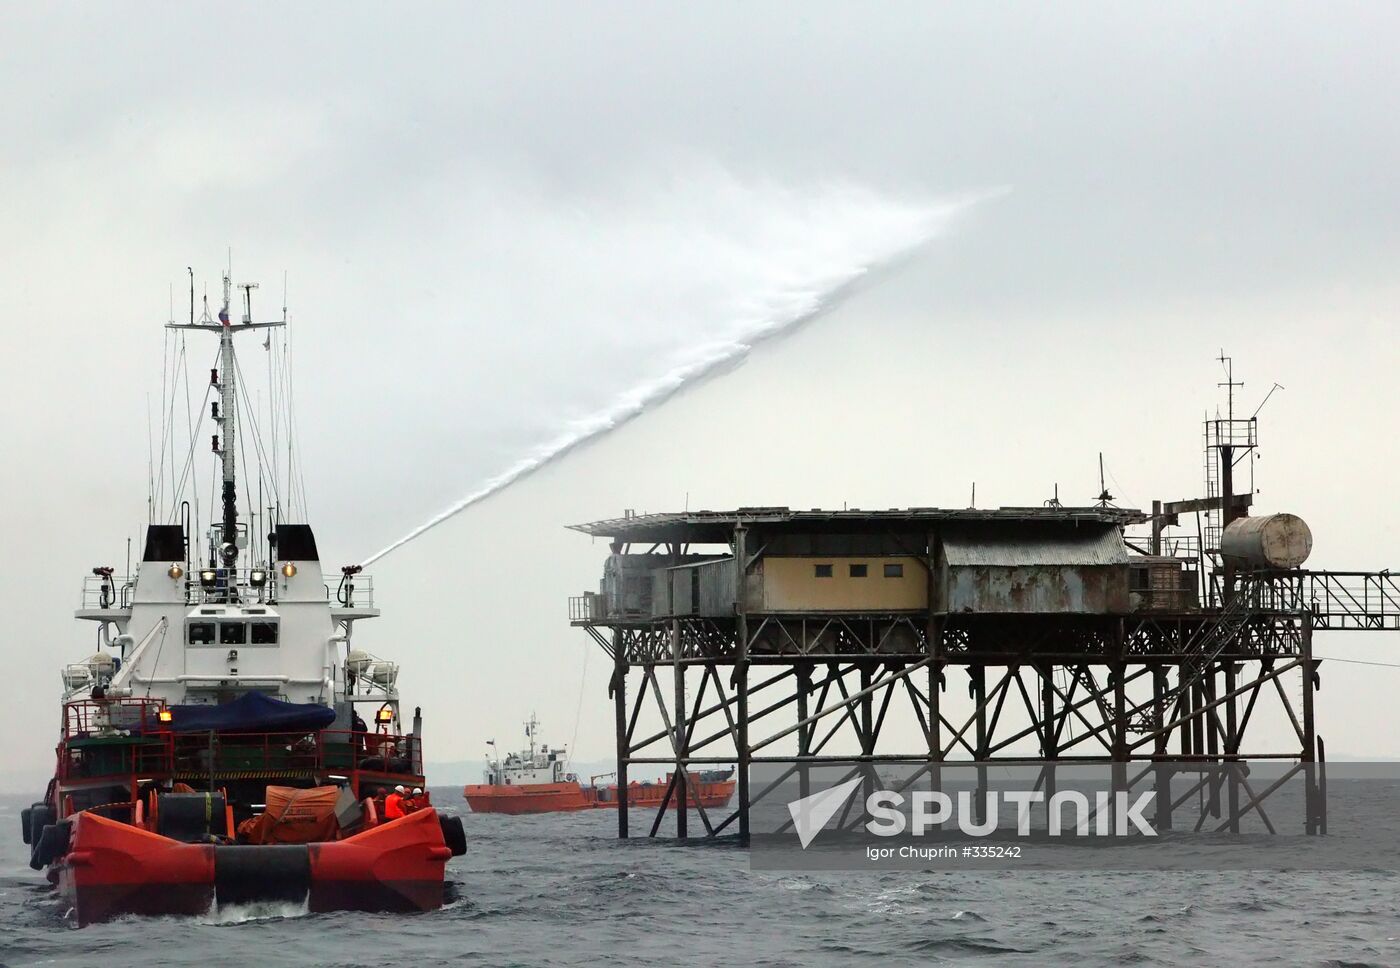 Rescuers take part in exercises at Baltic Sea